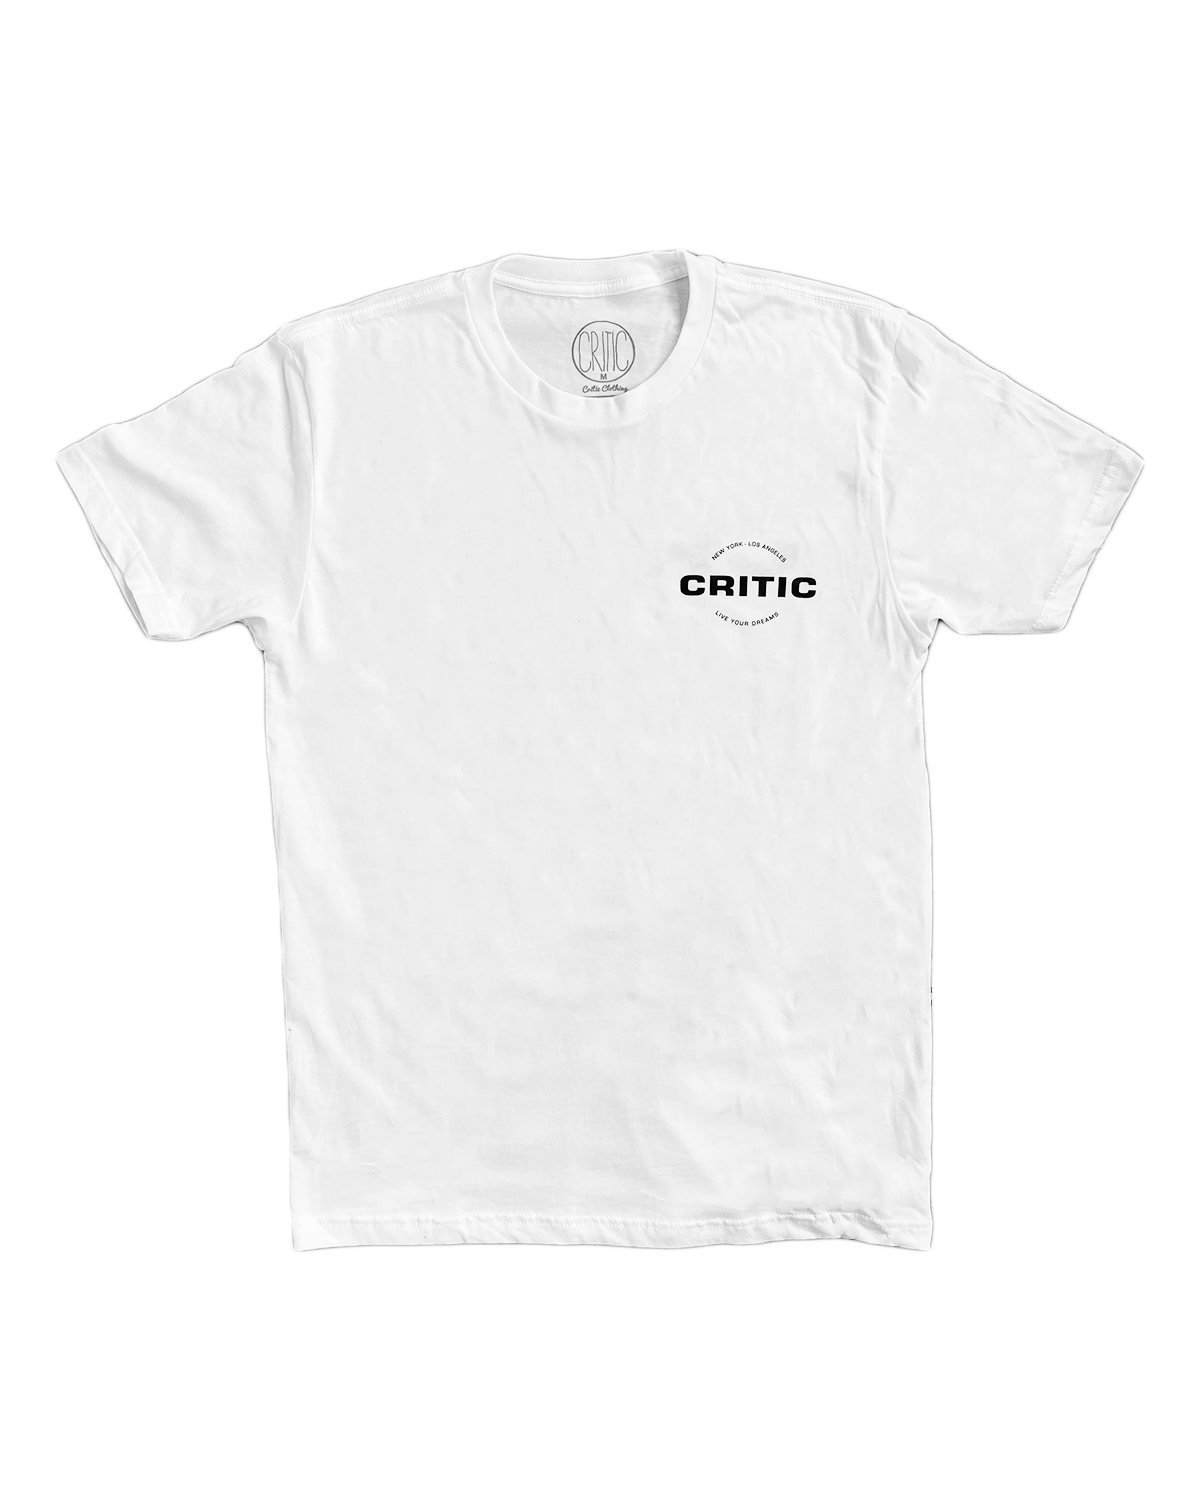 Live Your Dreams tee in White